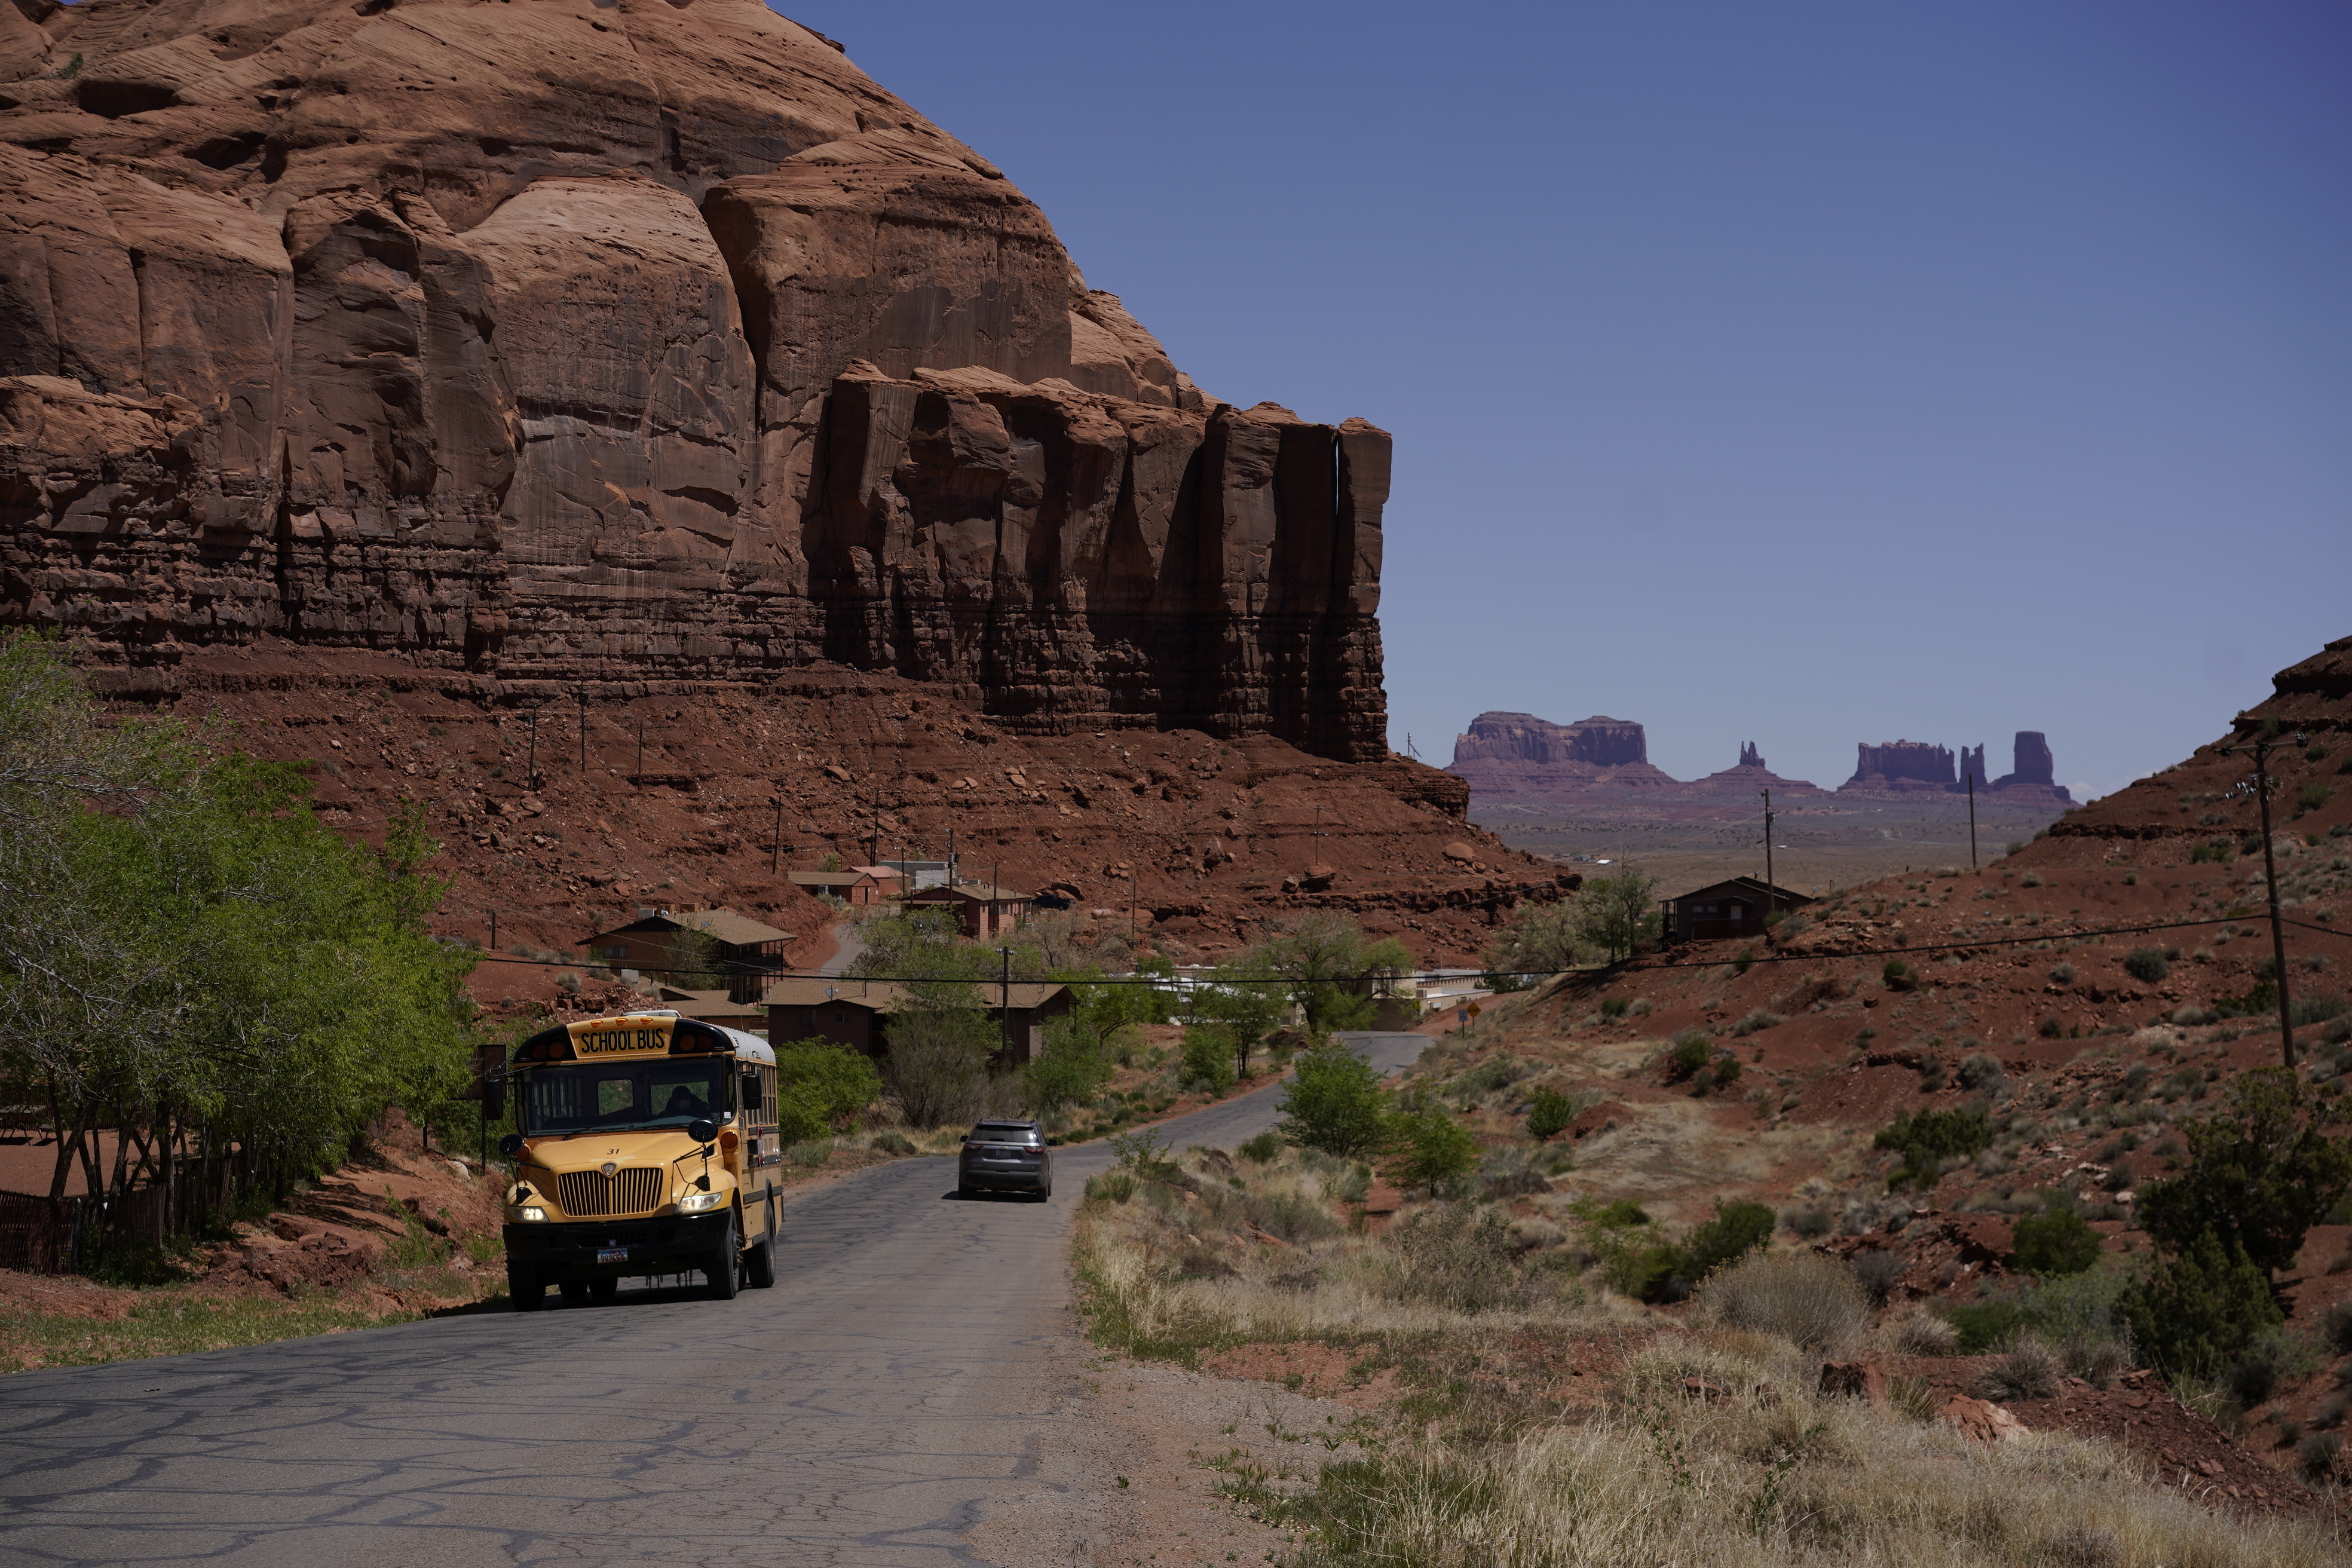  A school bus moves up a road in Oljato-Monument Valley, Utah, on the Navajo reservation on April 27.